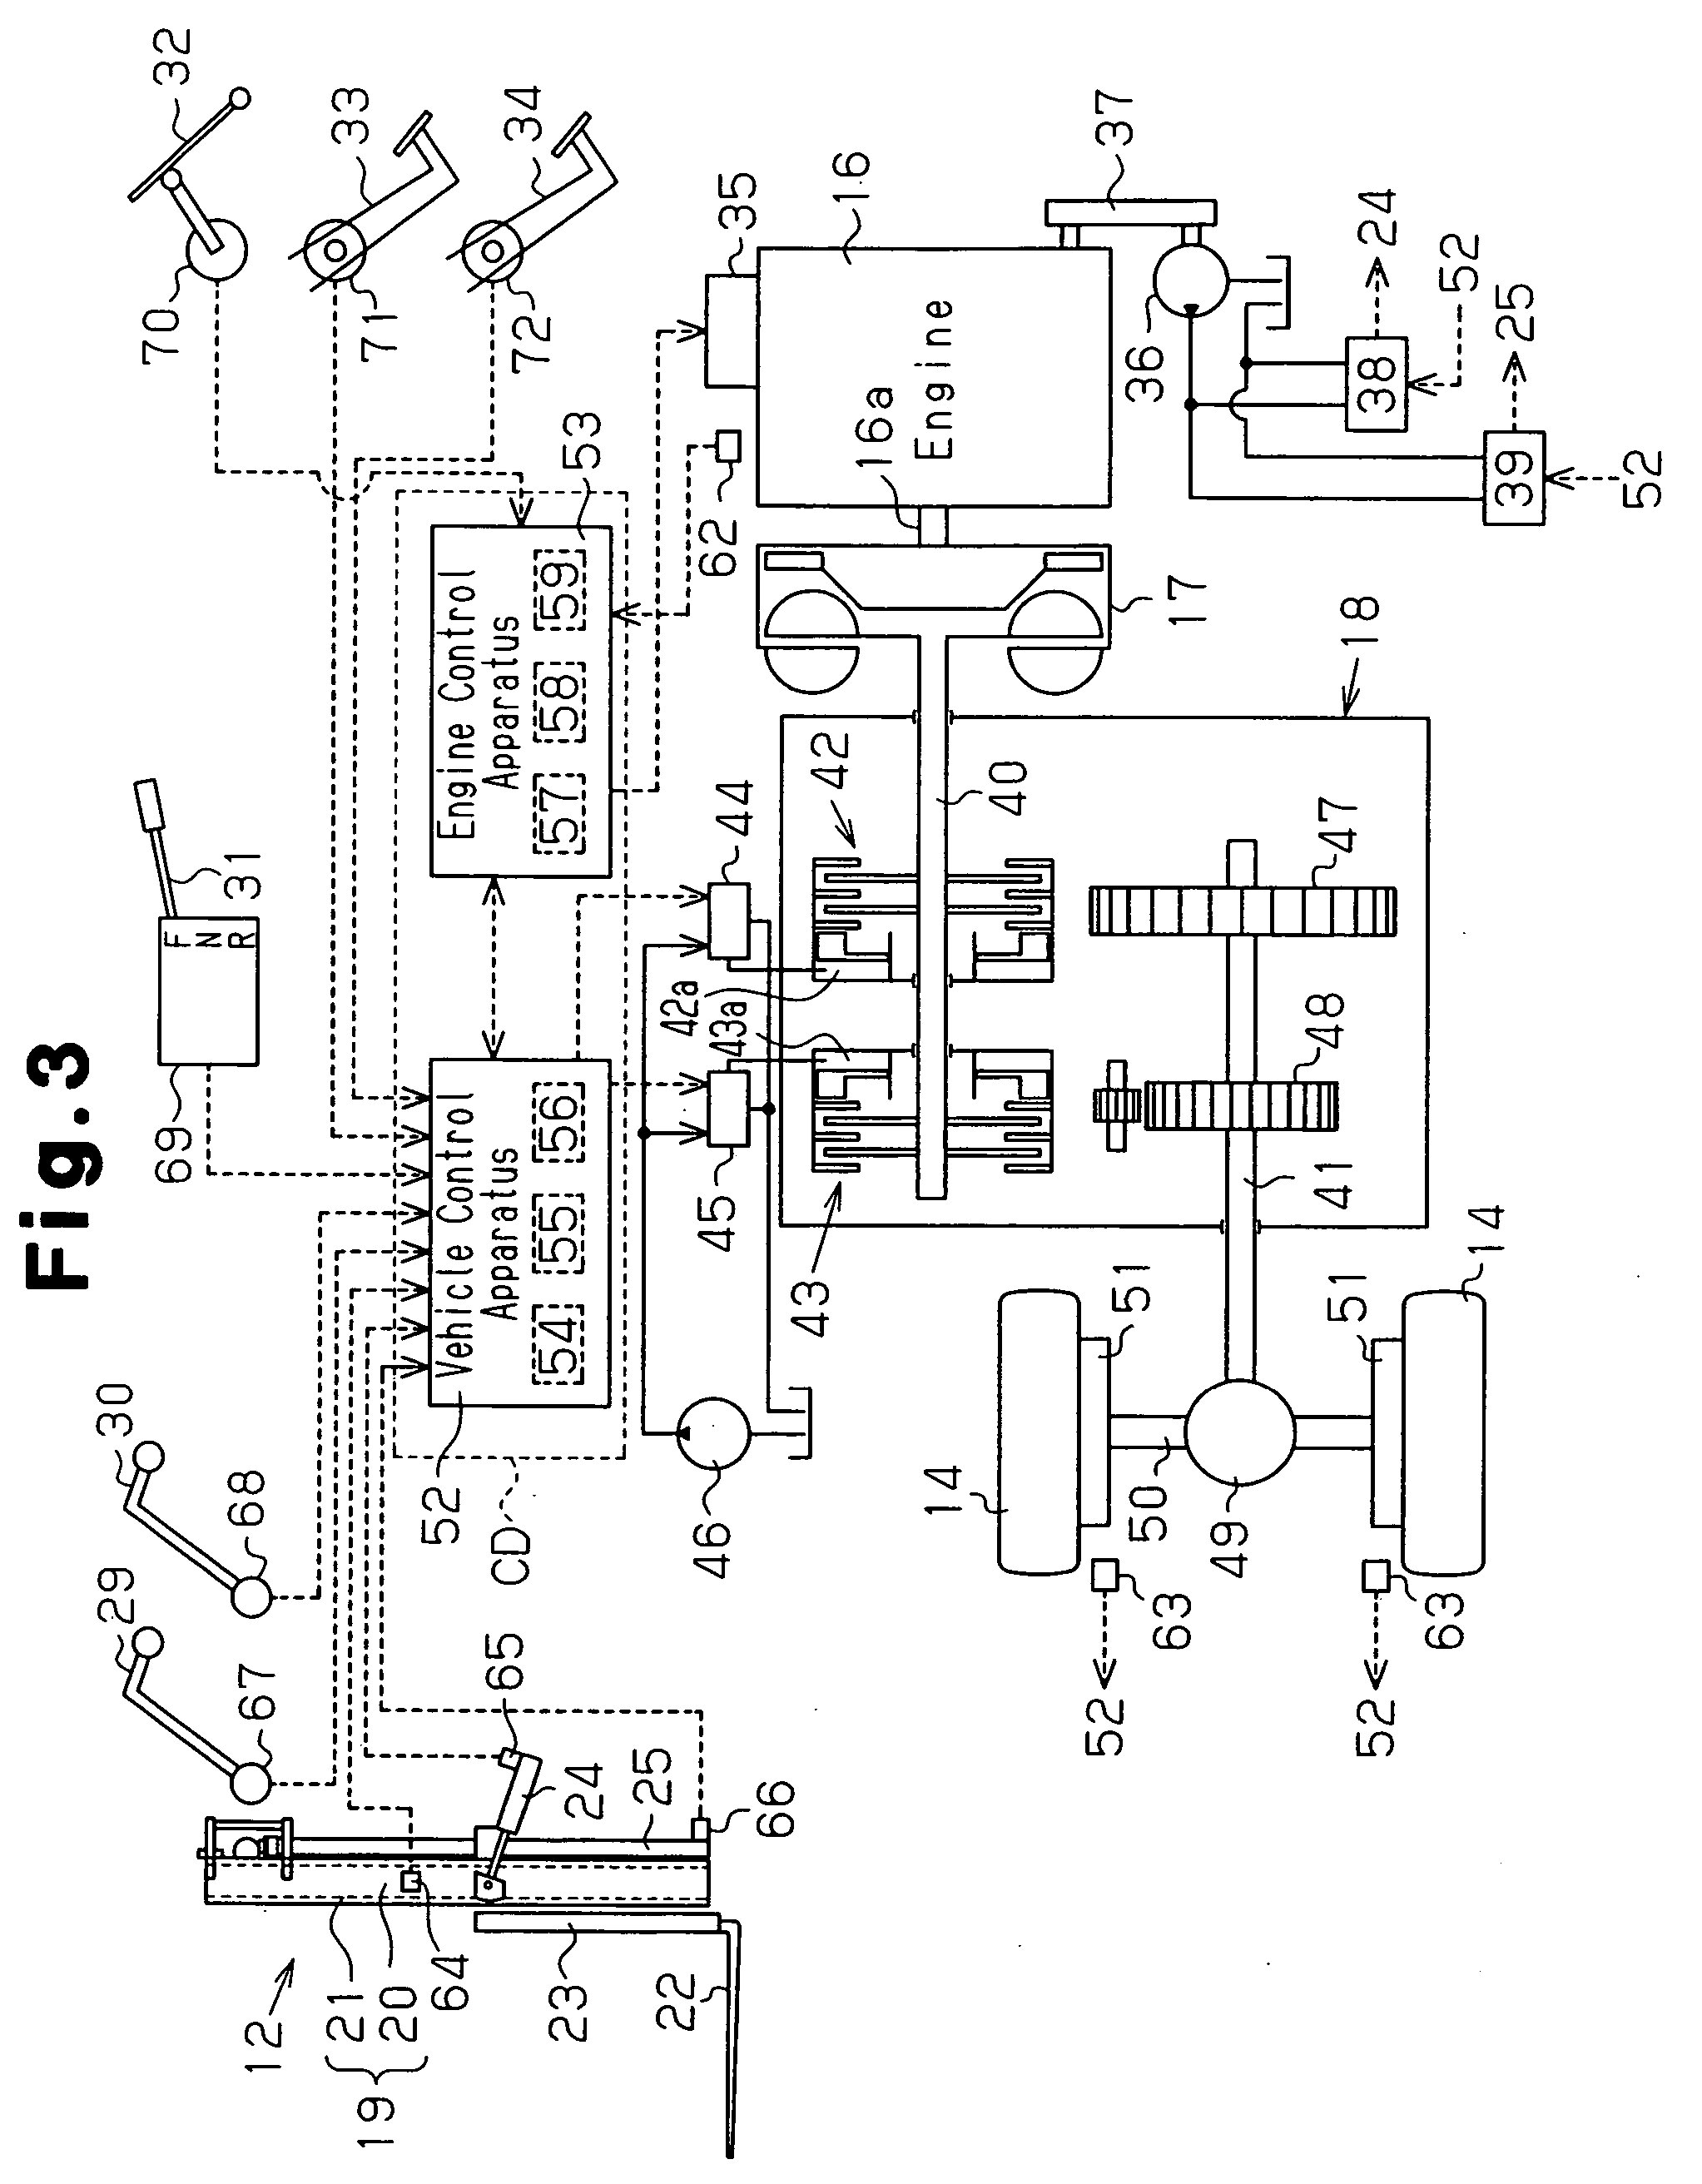 Drive control apparatus for forklift